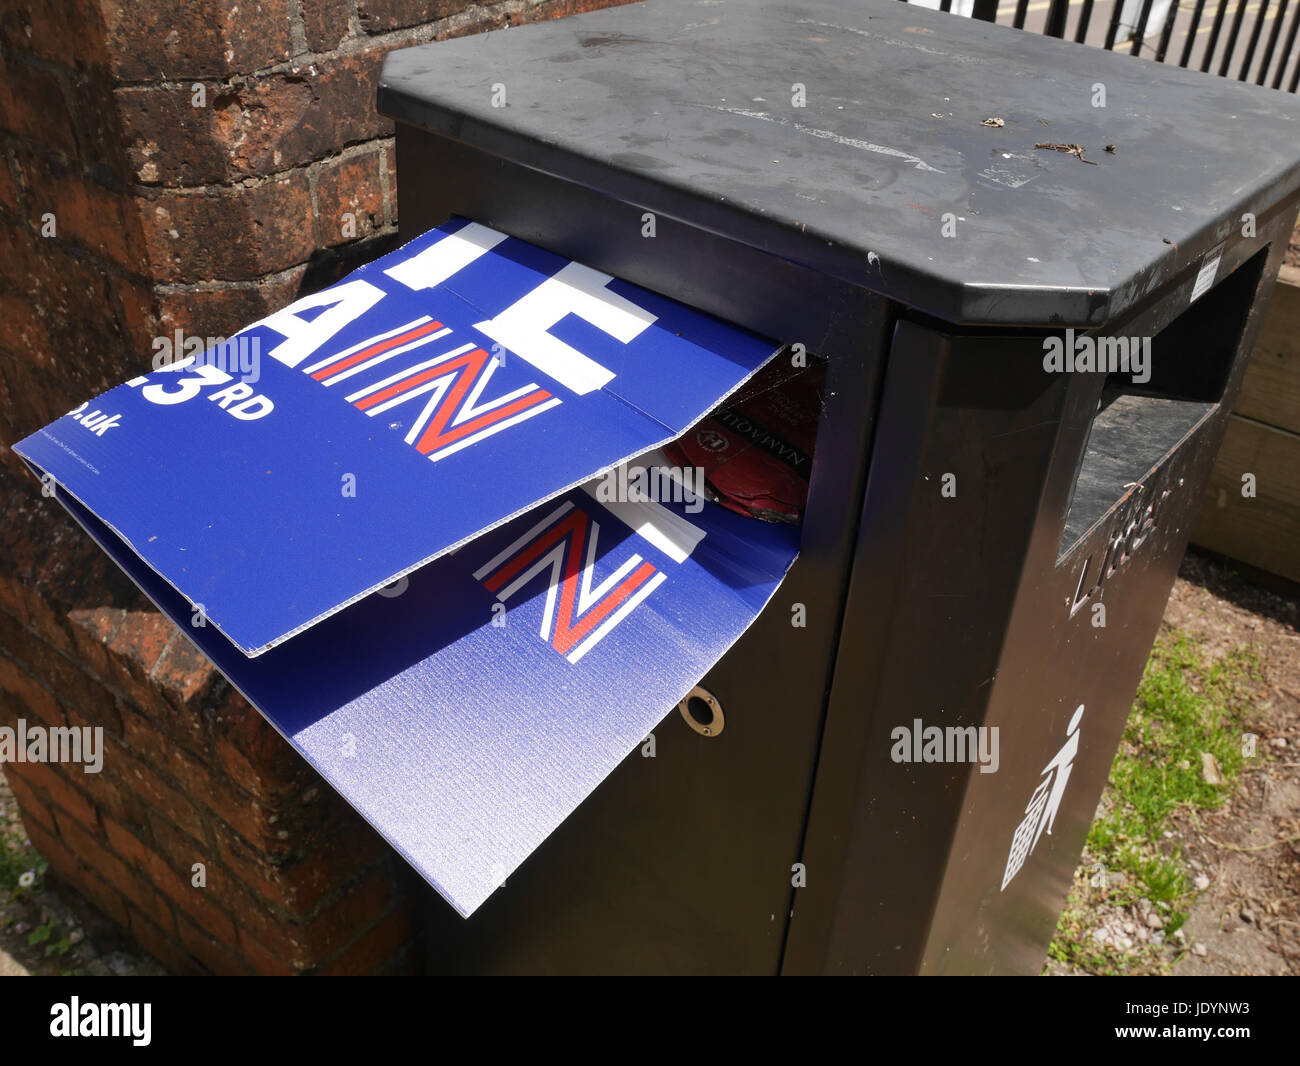 Remain Poster Confined to The Litter Bin after the EU Referendum after the 23 June 2016, Totness, Devon, England, UK Stock Photo